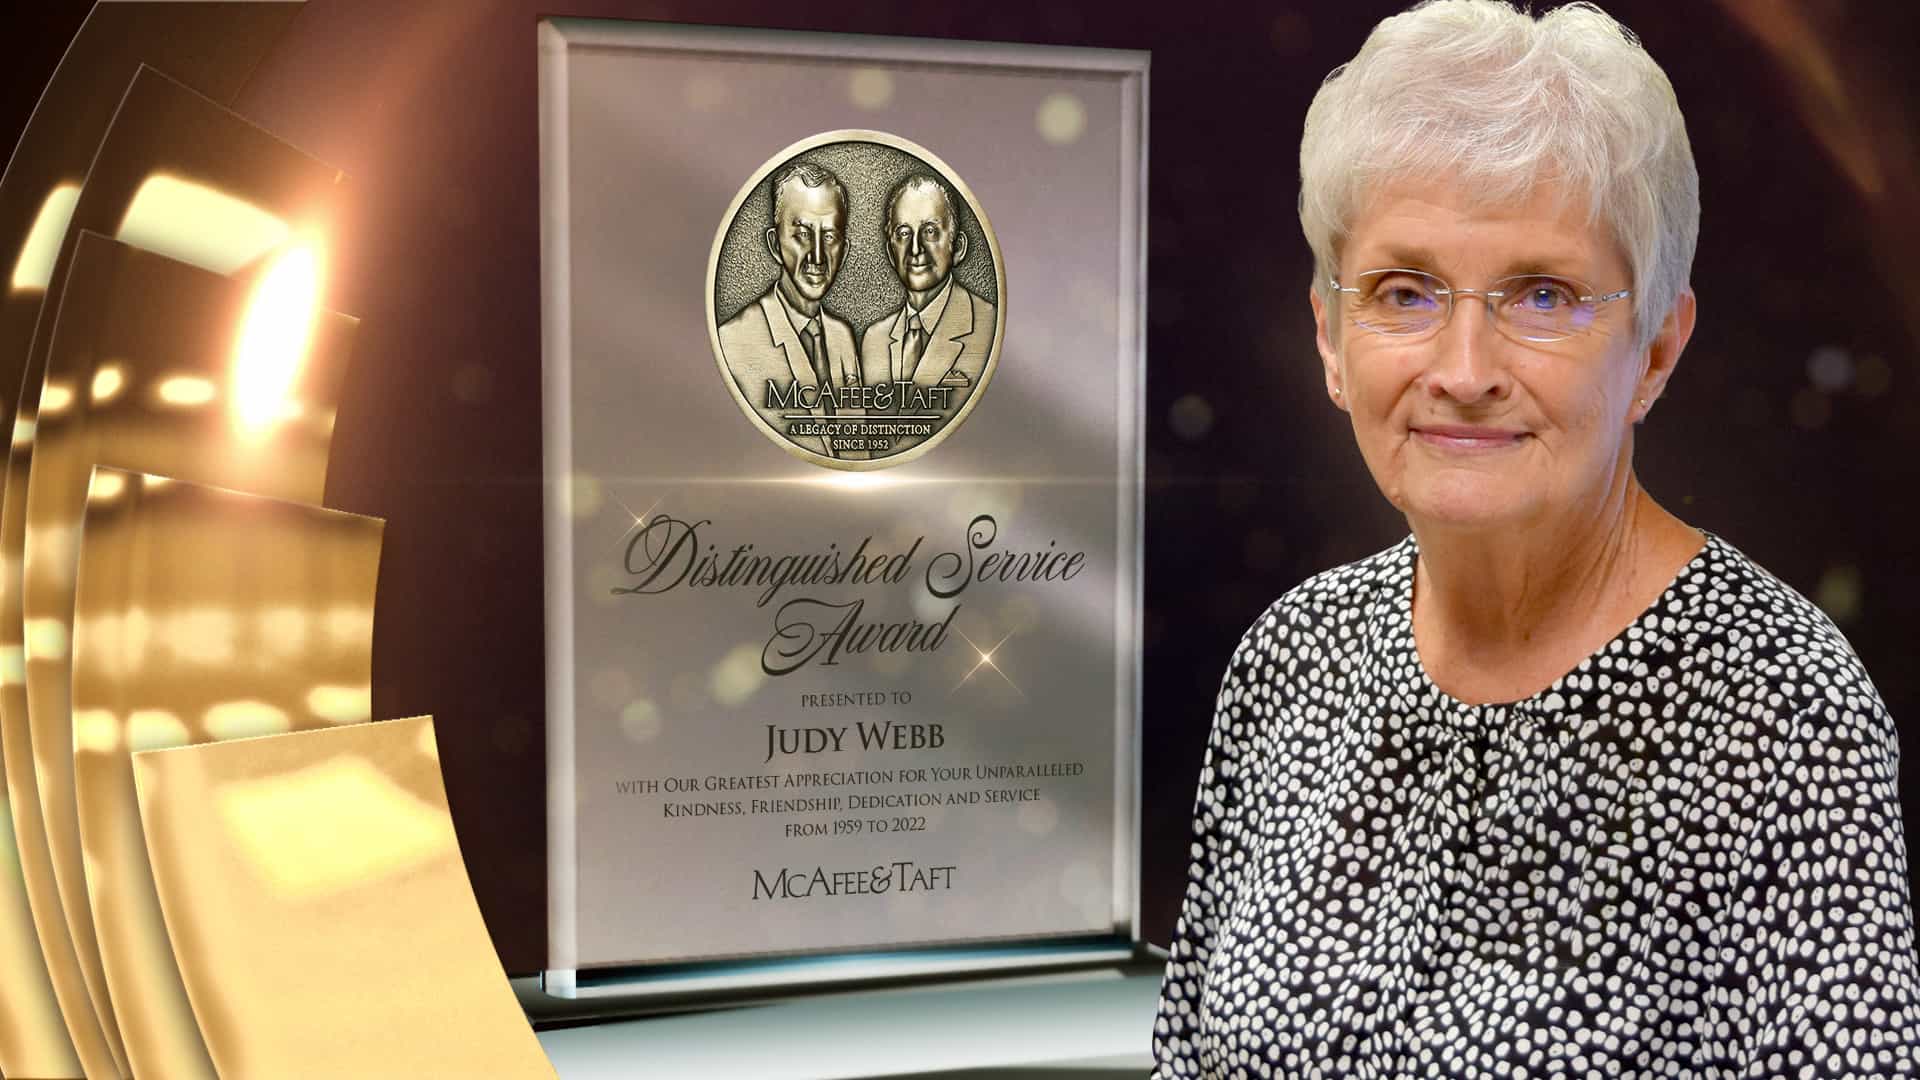 Graphic of Distinguished Service Award for Judy Webb